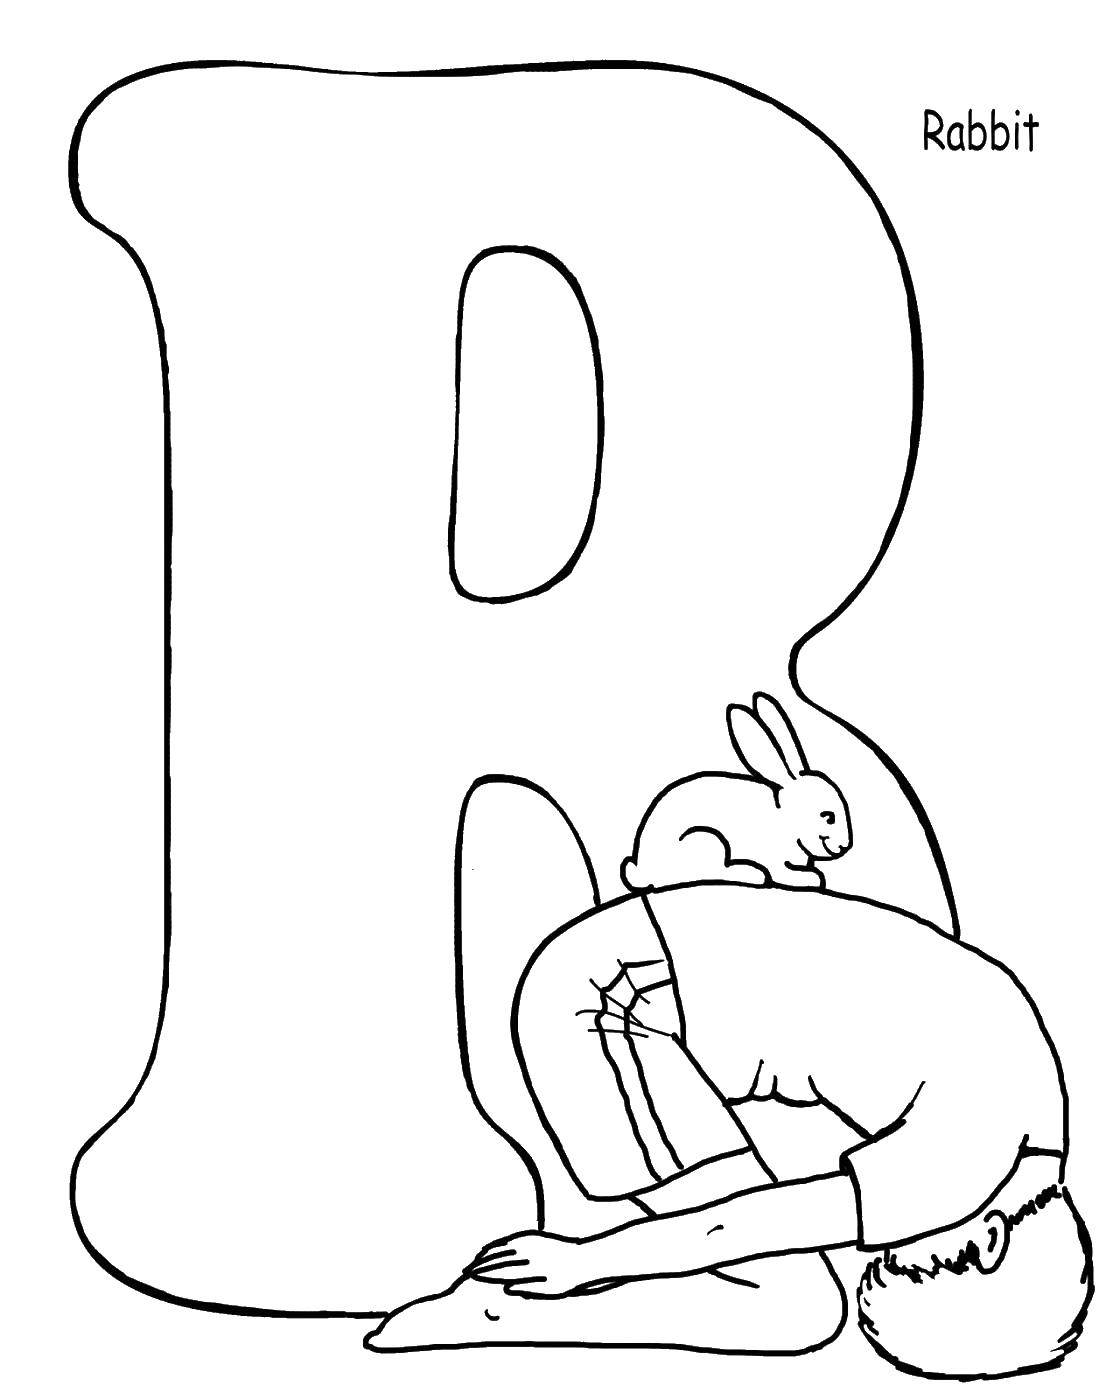 Coloring English alphabet picture r. Category English alphabet. Tags:  English, R.